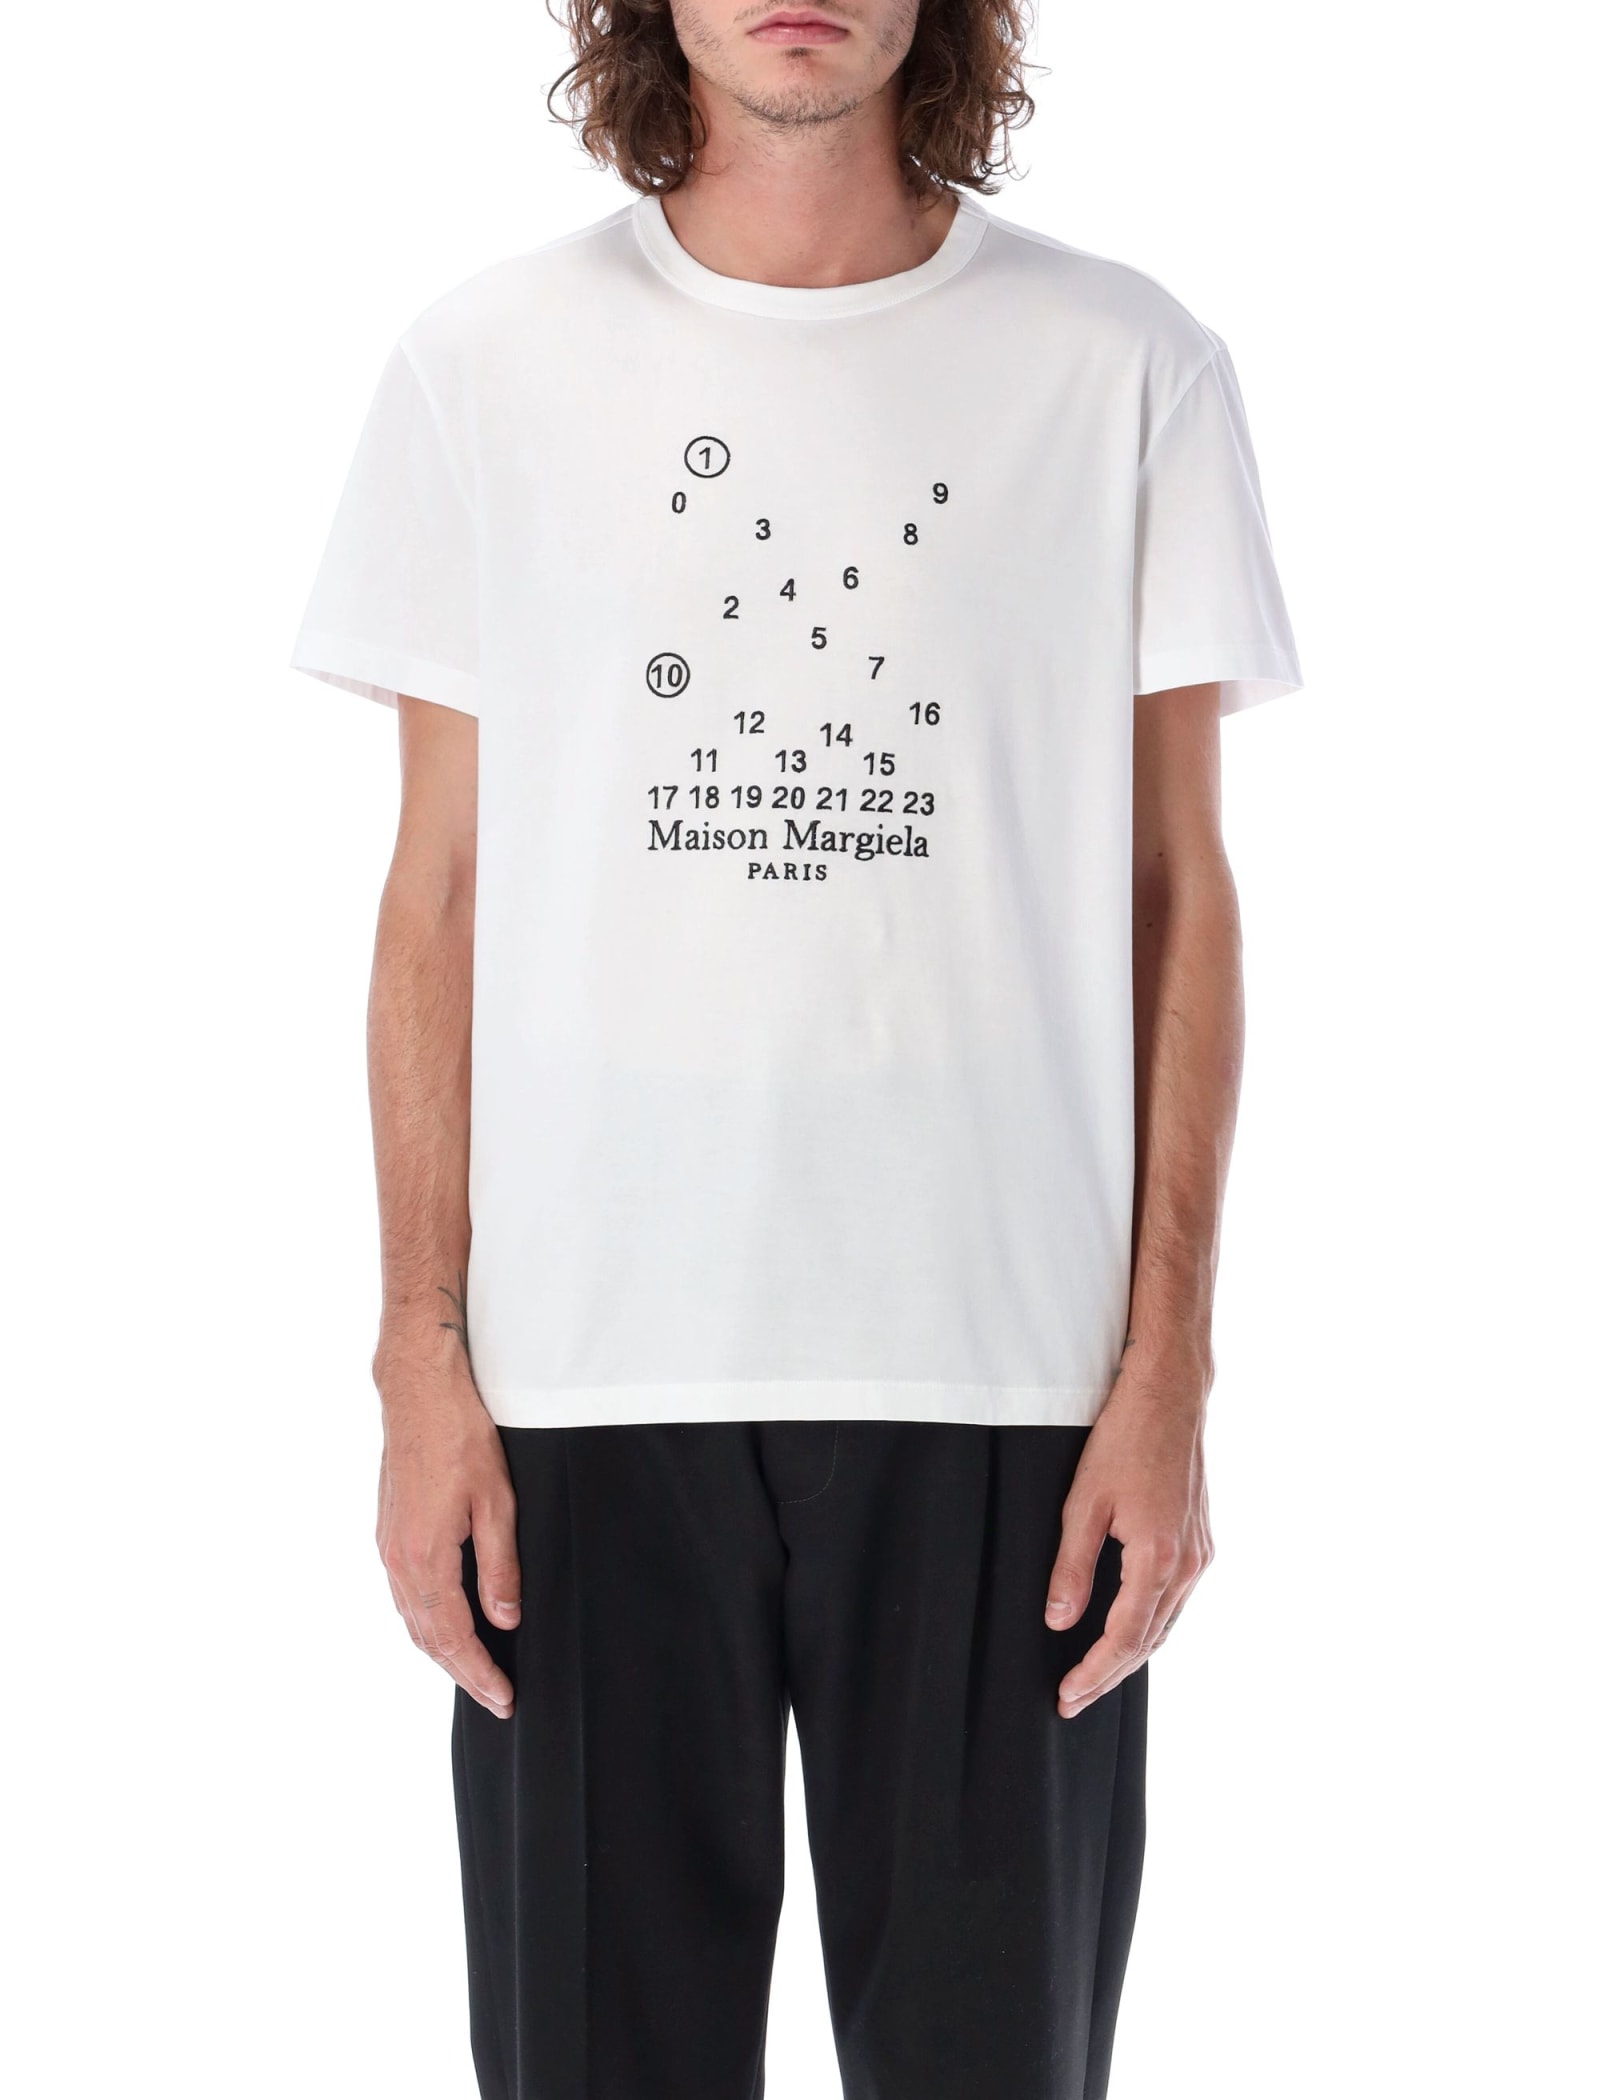 Maison Margiela Embroidered Numbers T-shirt